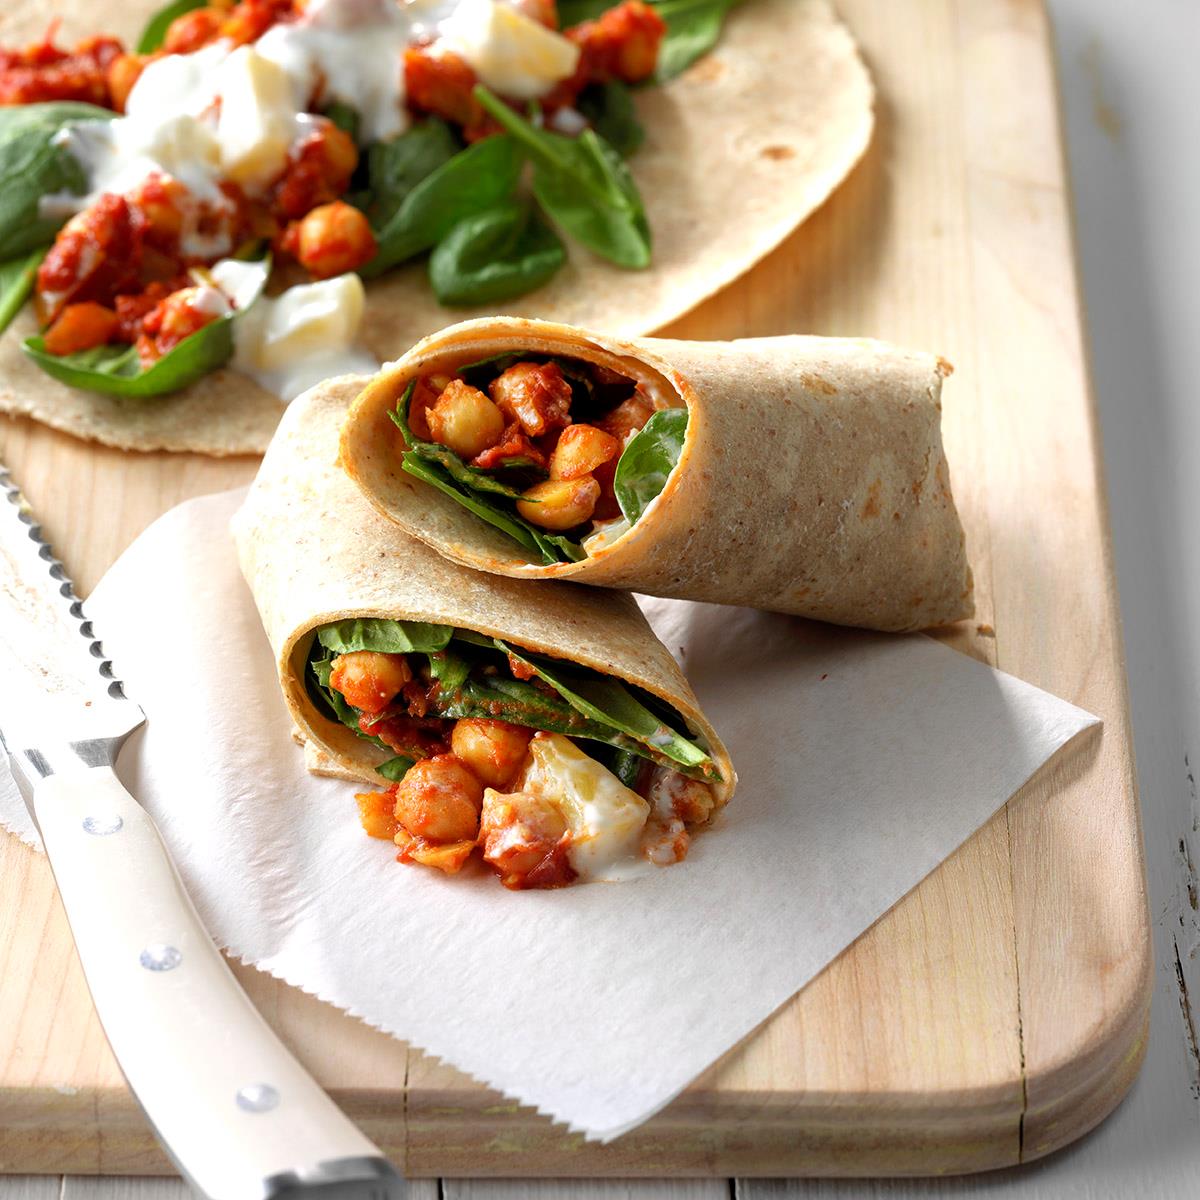 Indian Spiced Chickpea Wraps Recipe: How to Make It